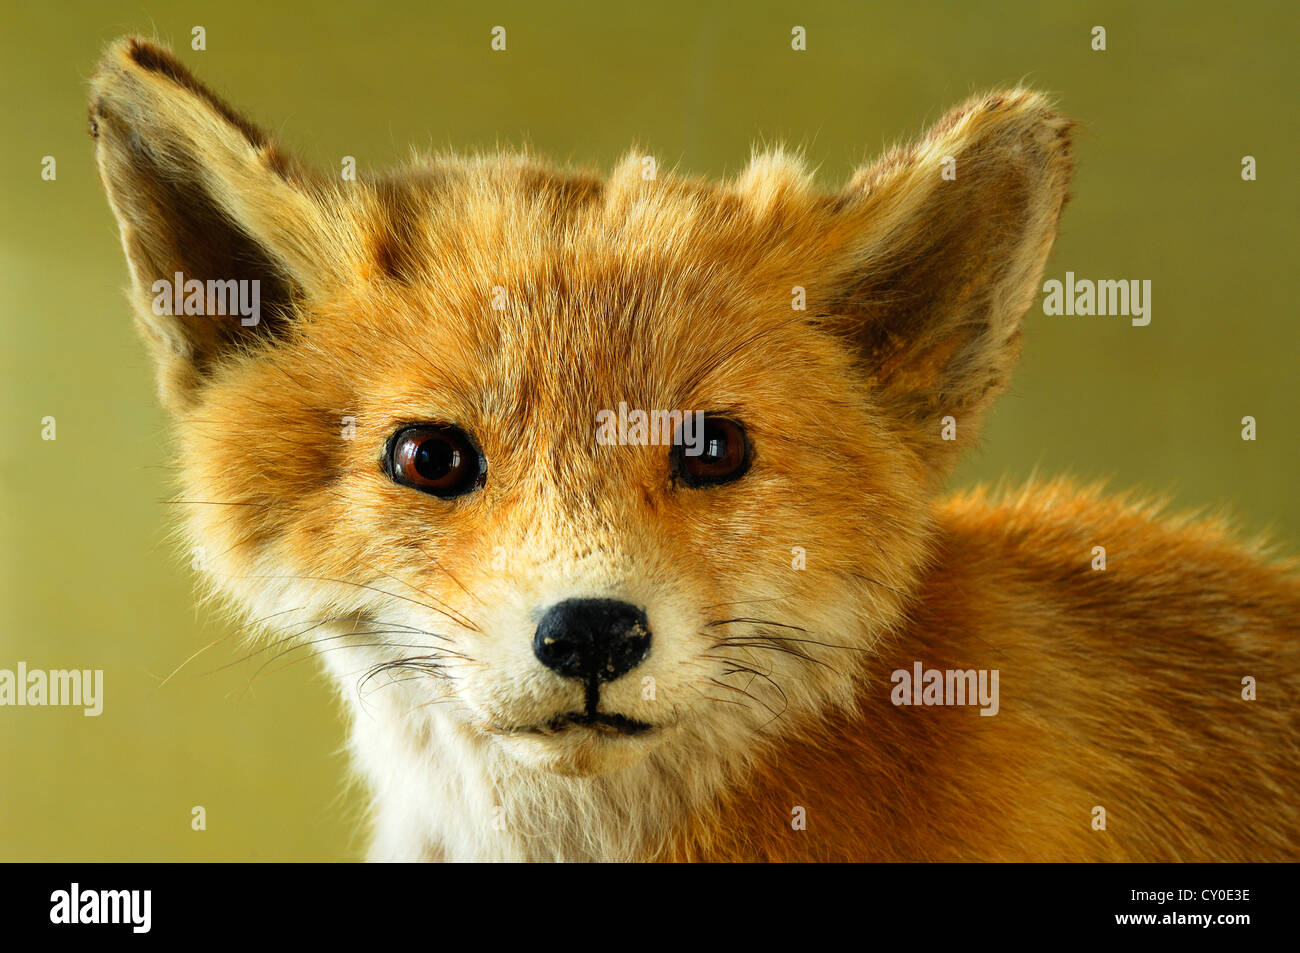 Taxidermied animal, head of a young Fox (Vulpes vulpes), 2012 Special Exhibition, Museum of Industry, Sichartstrasse 5-25 Stock Photo